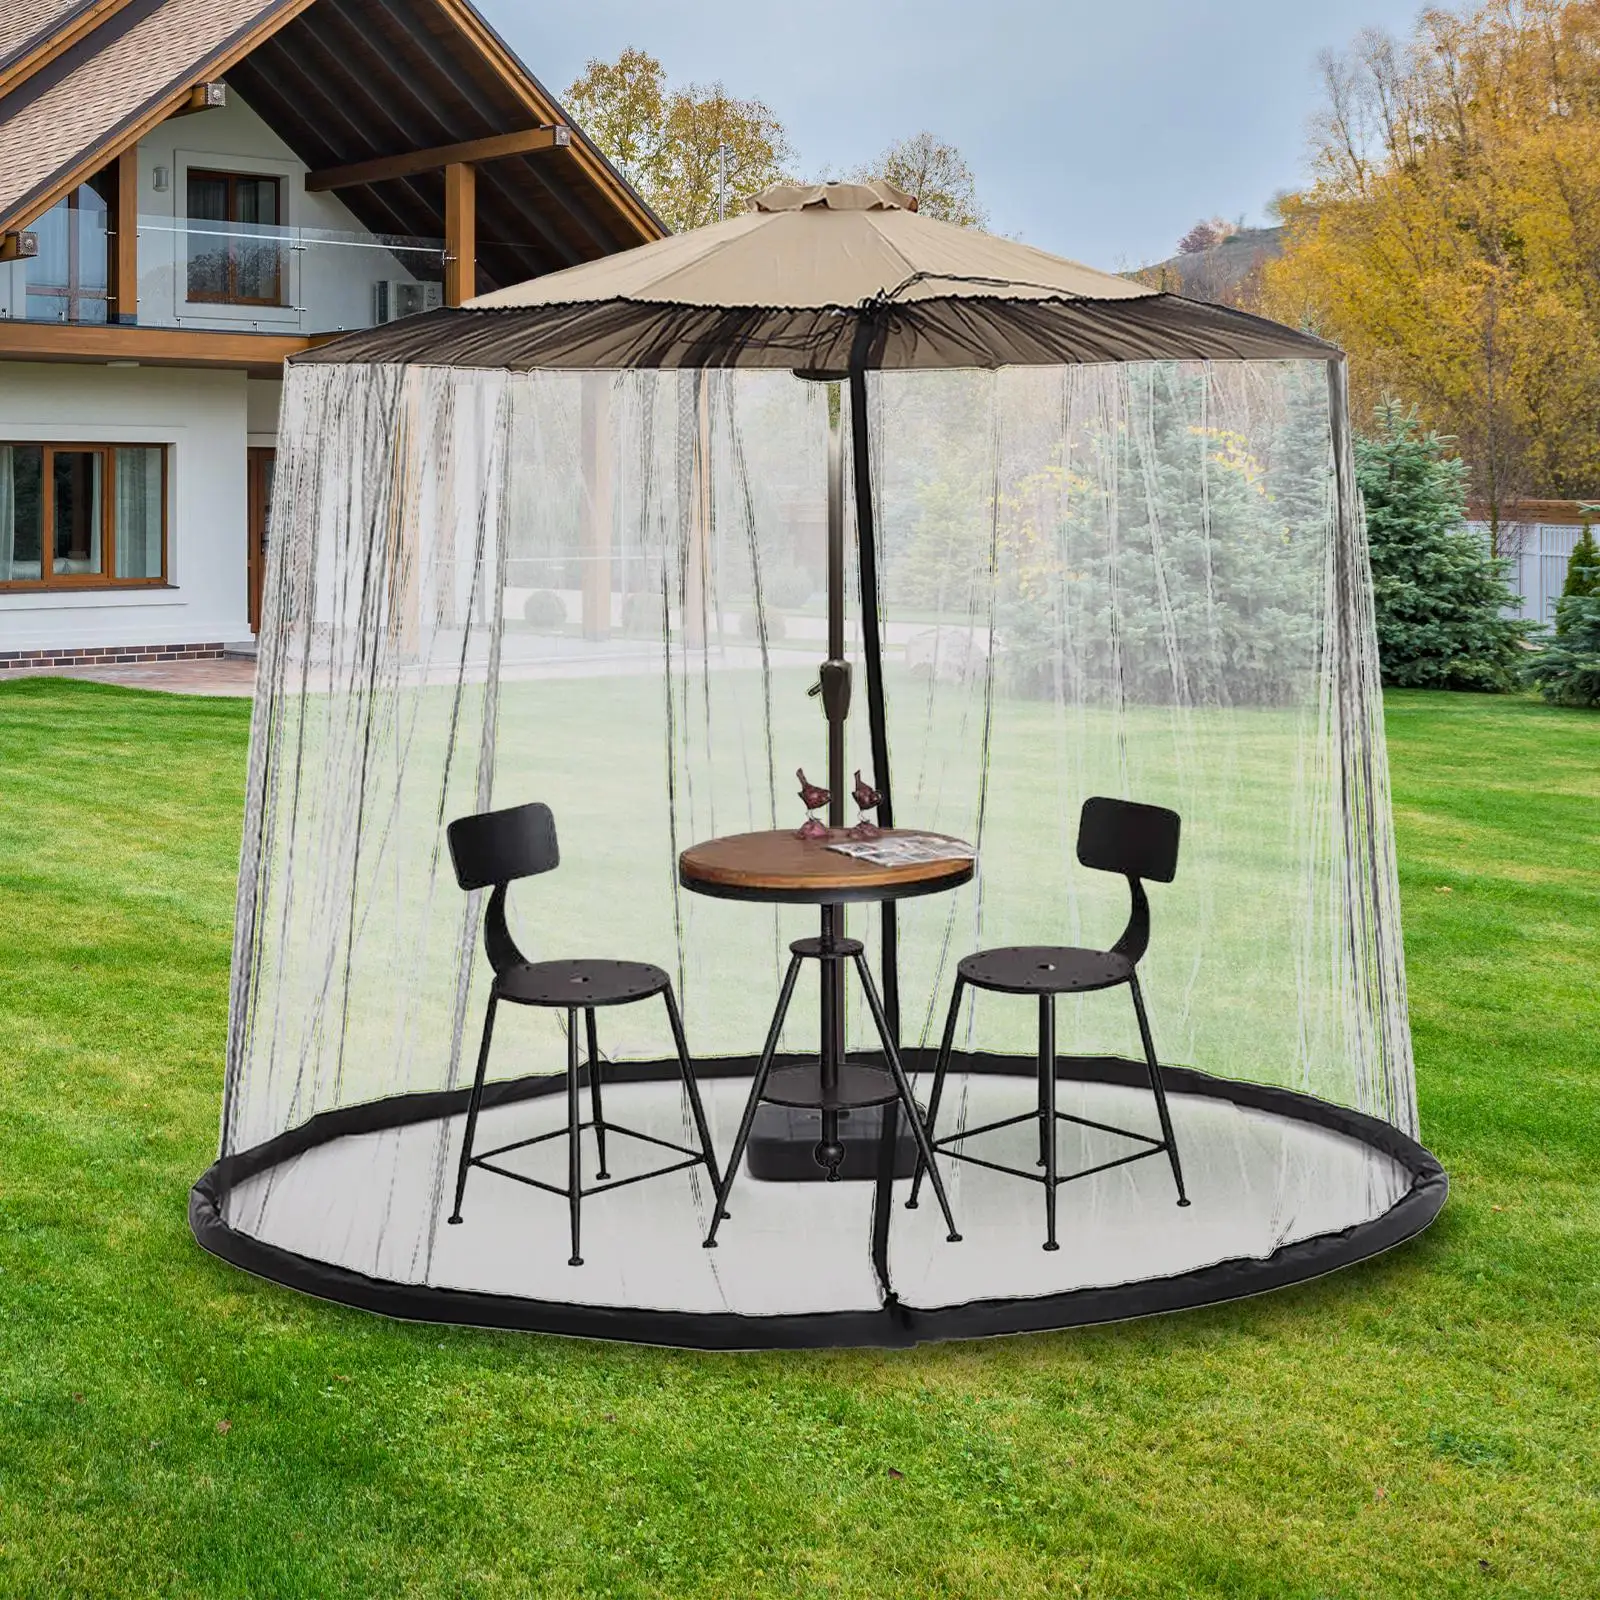 Umbrella Netting Adjustable Rope Hanging Curtains Foldable Mosquito Net Screen for Picnic Journey Fishing Cantilever Umbrellas